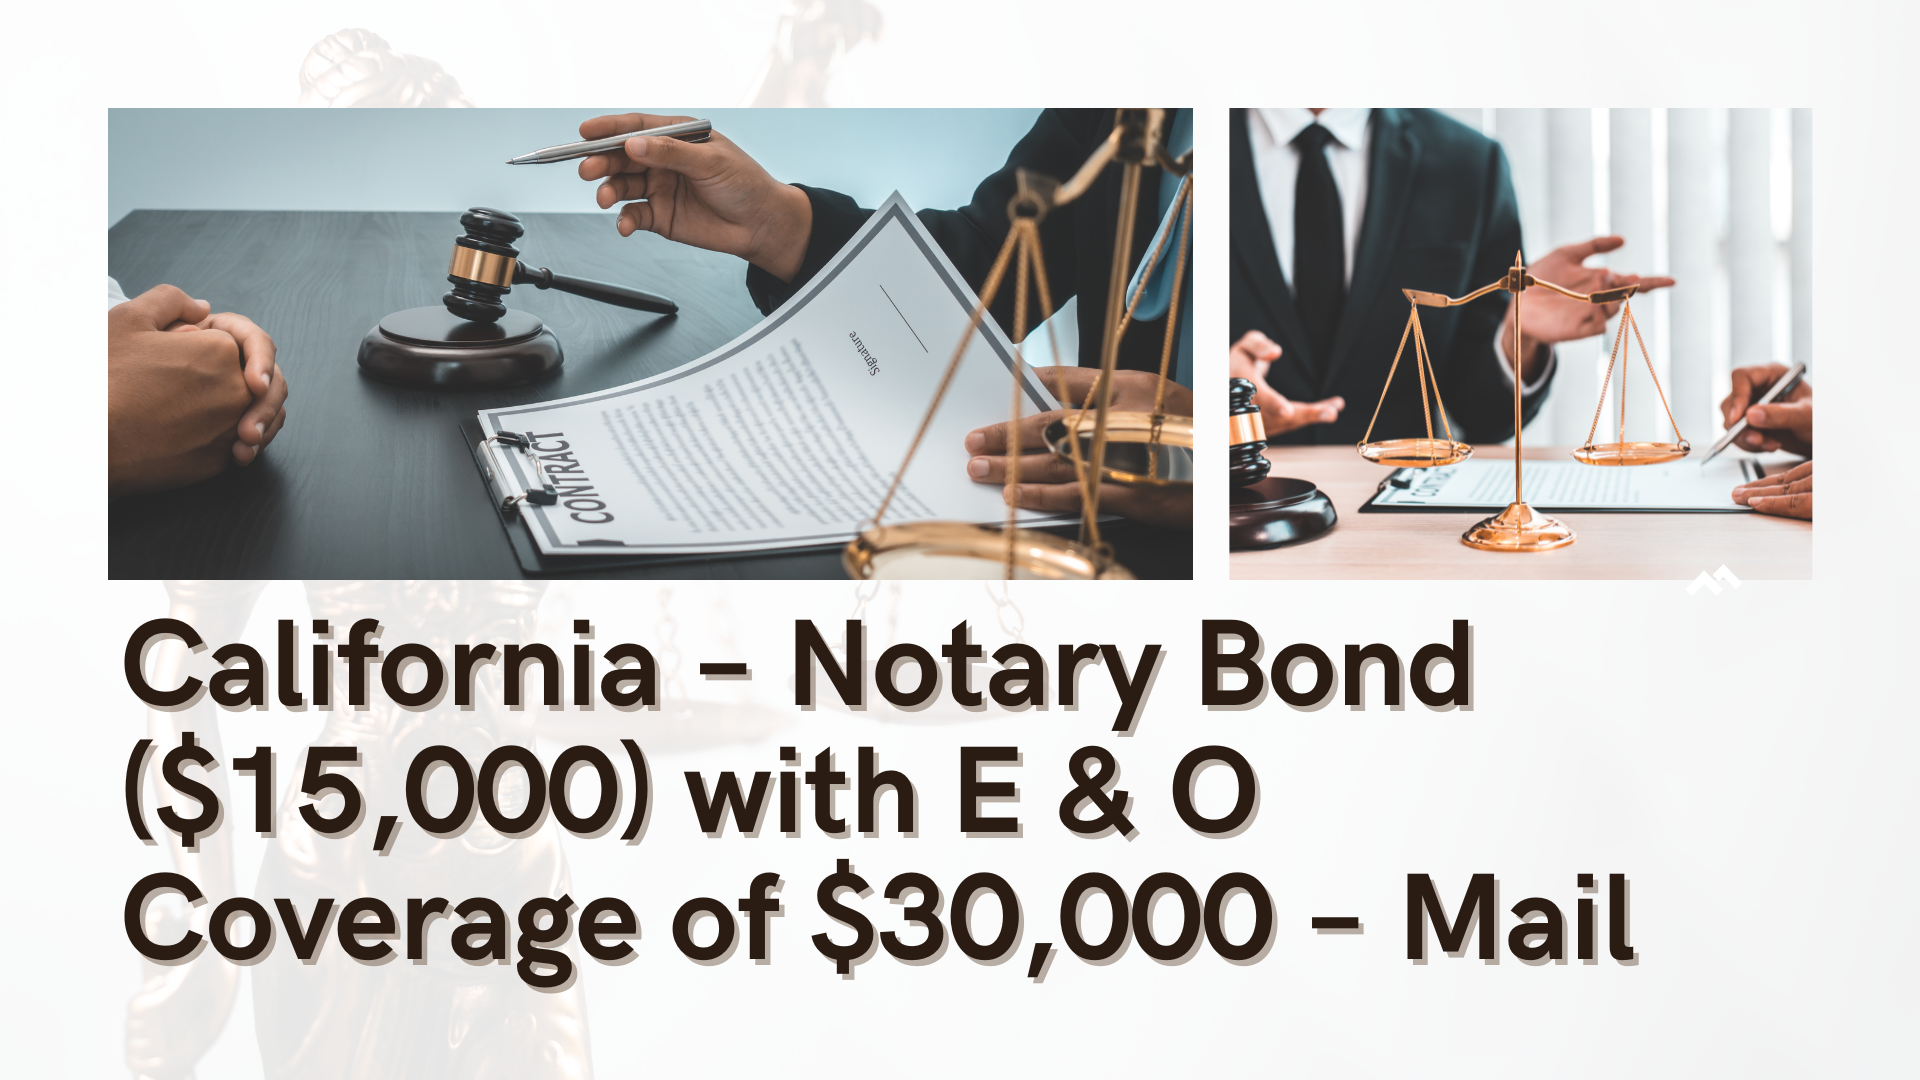 Surety Bond-California – Notary Bond ($15,000) with E & O Coverage of $30,000 – Mail